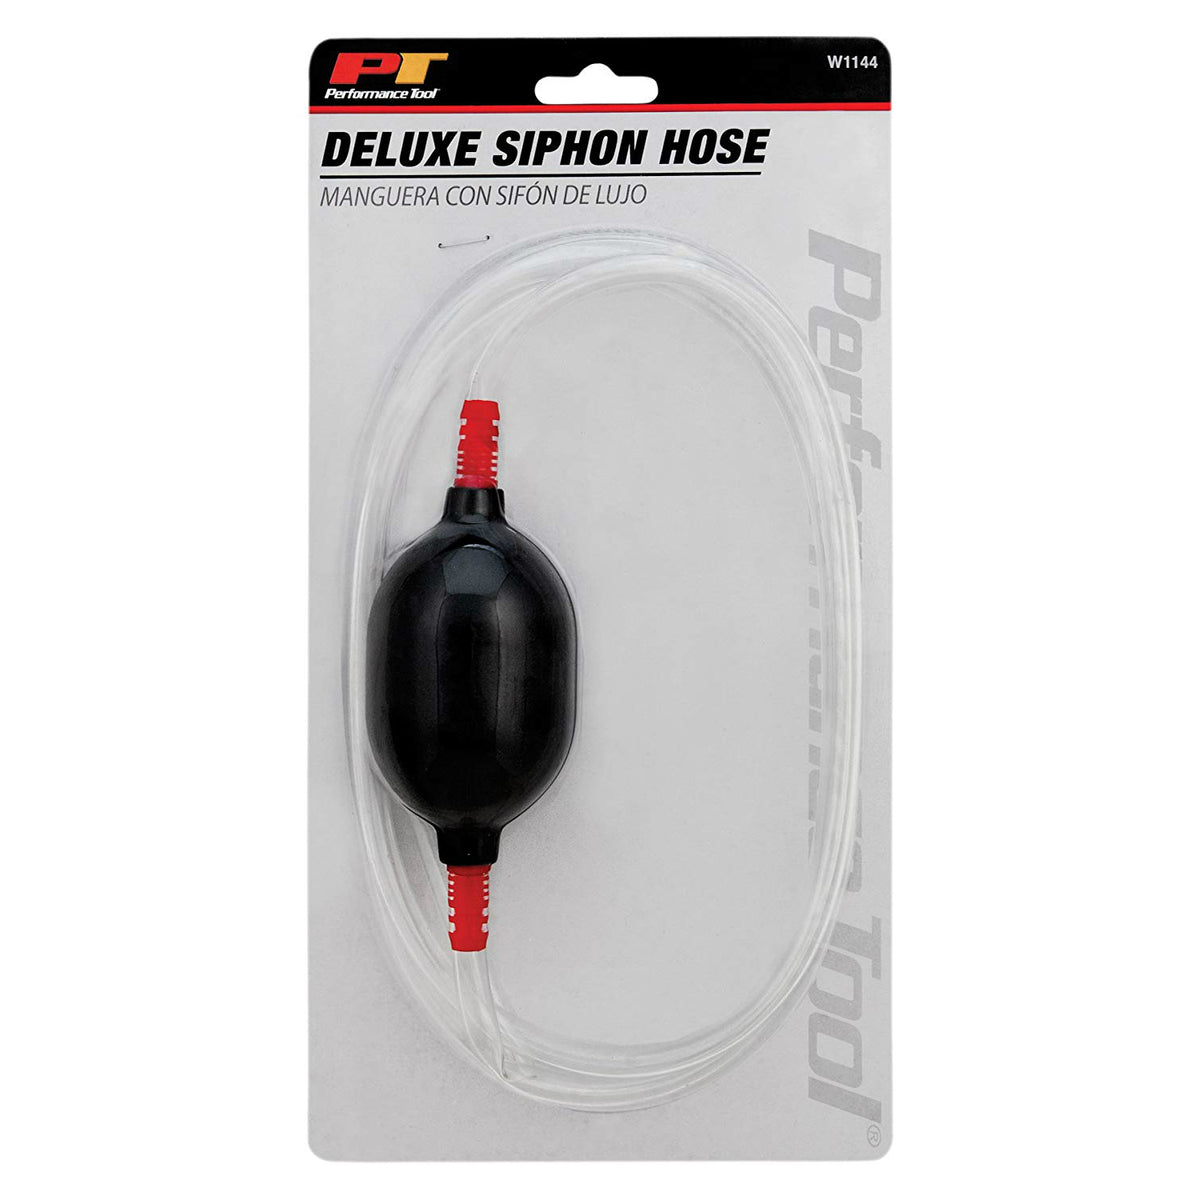 Performance Tool W1144 Deluxe Siphon Hose, Rubber